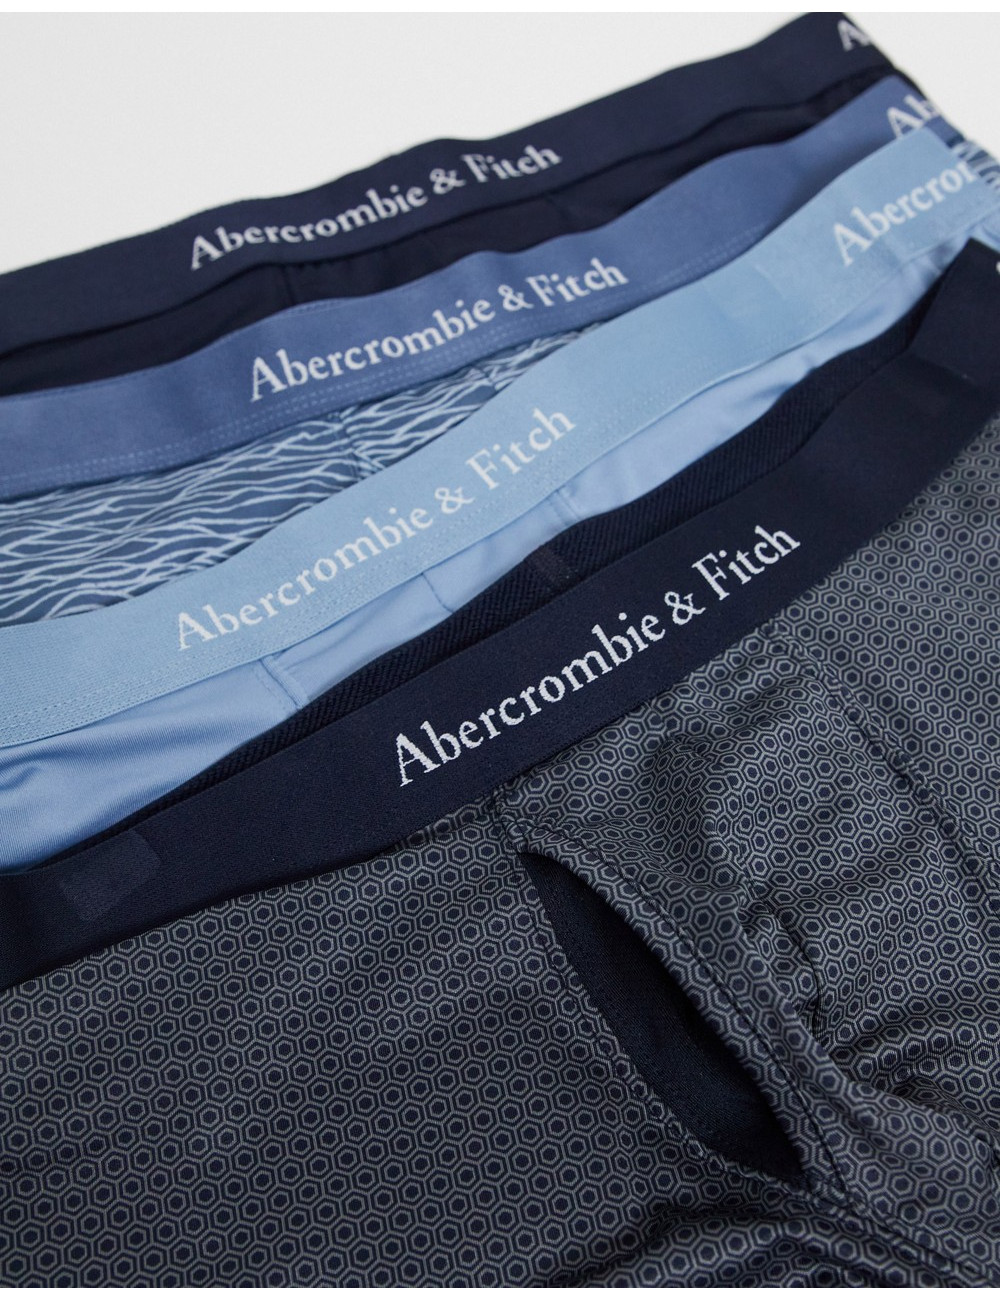 Abercrombie & Fitch 4 pack...